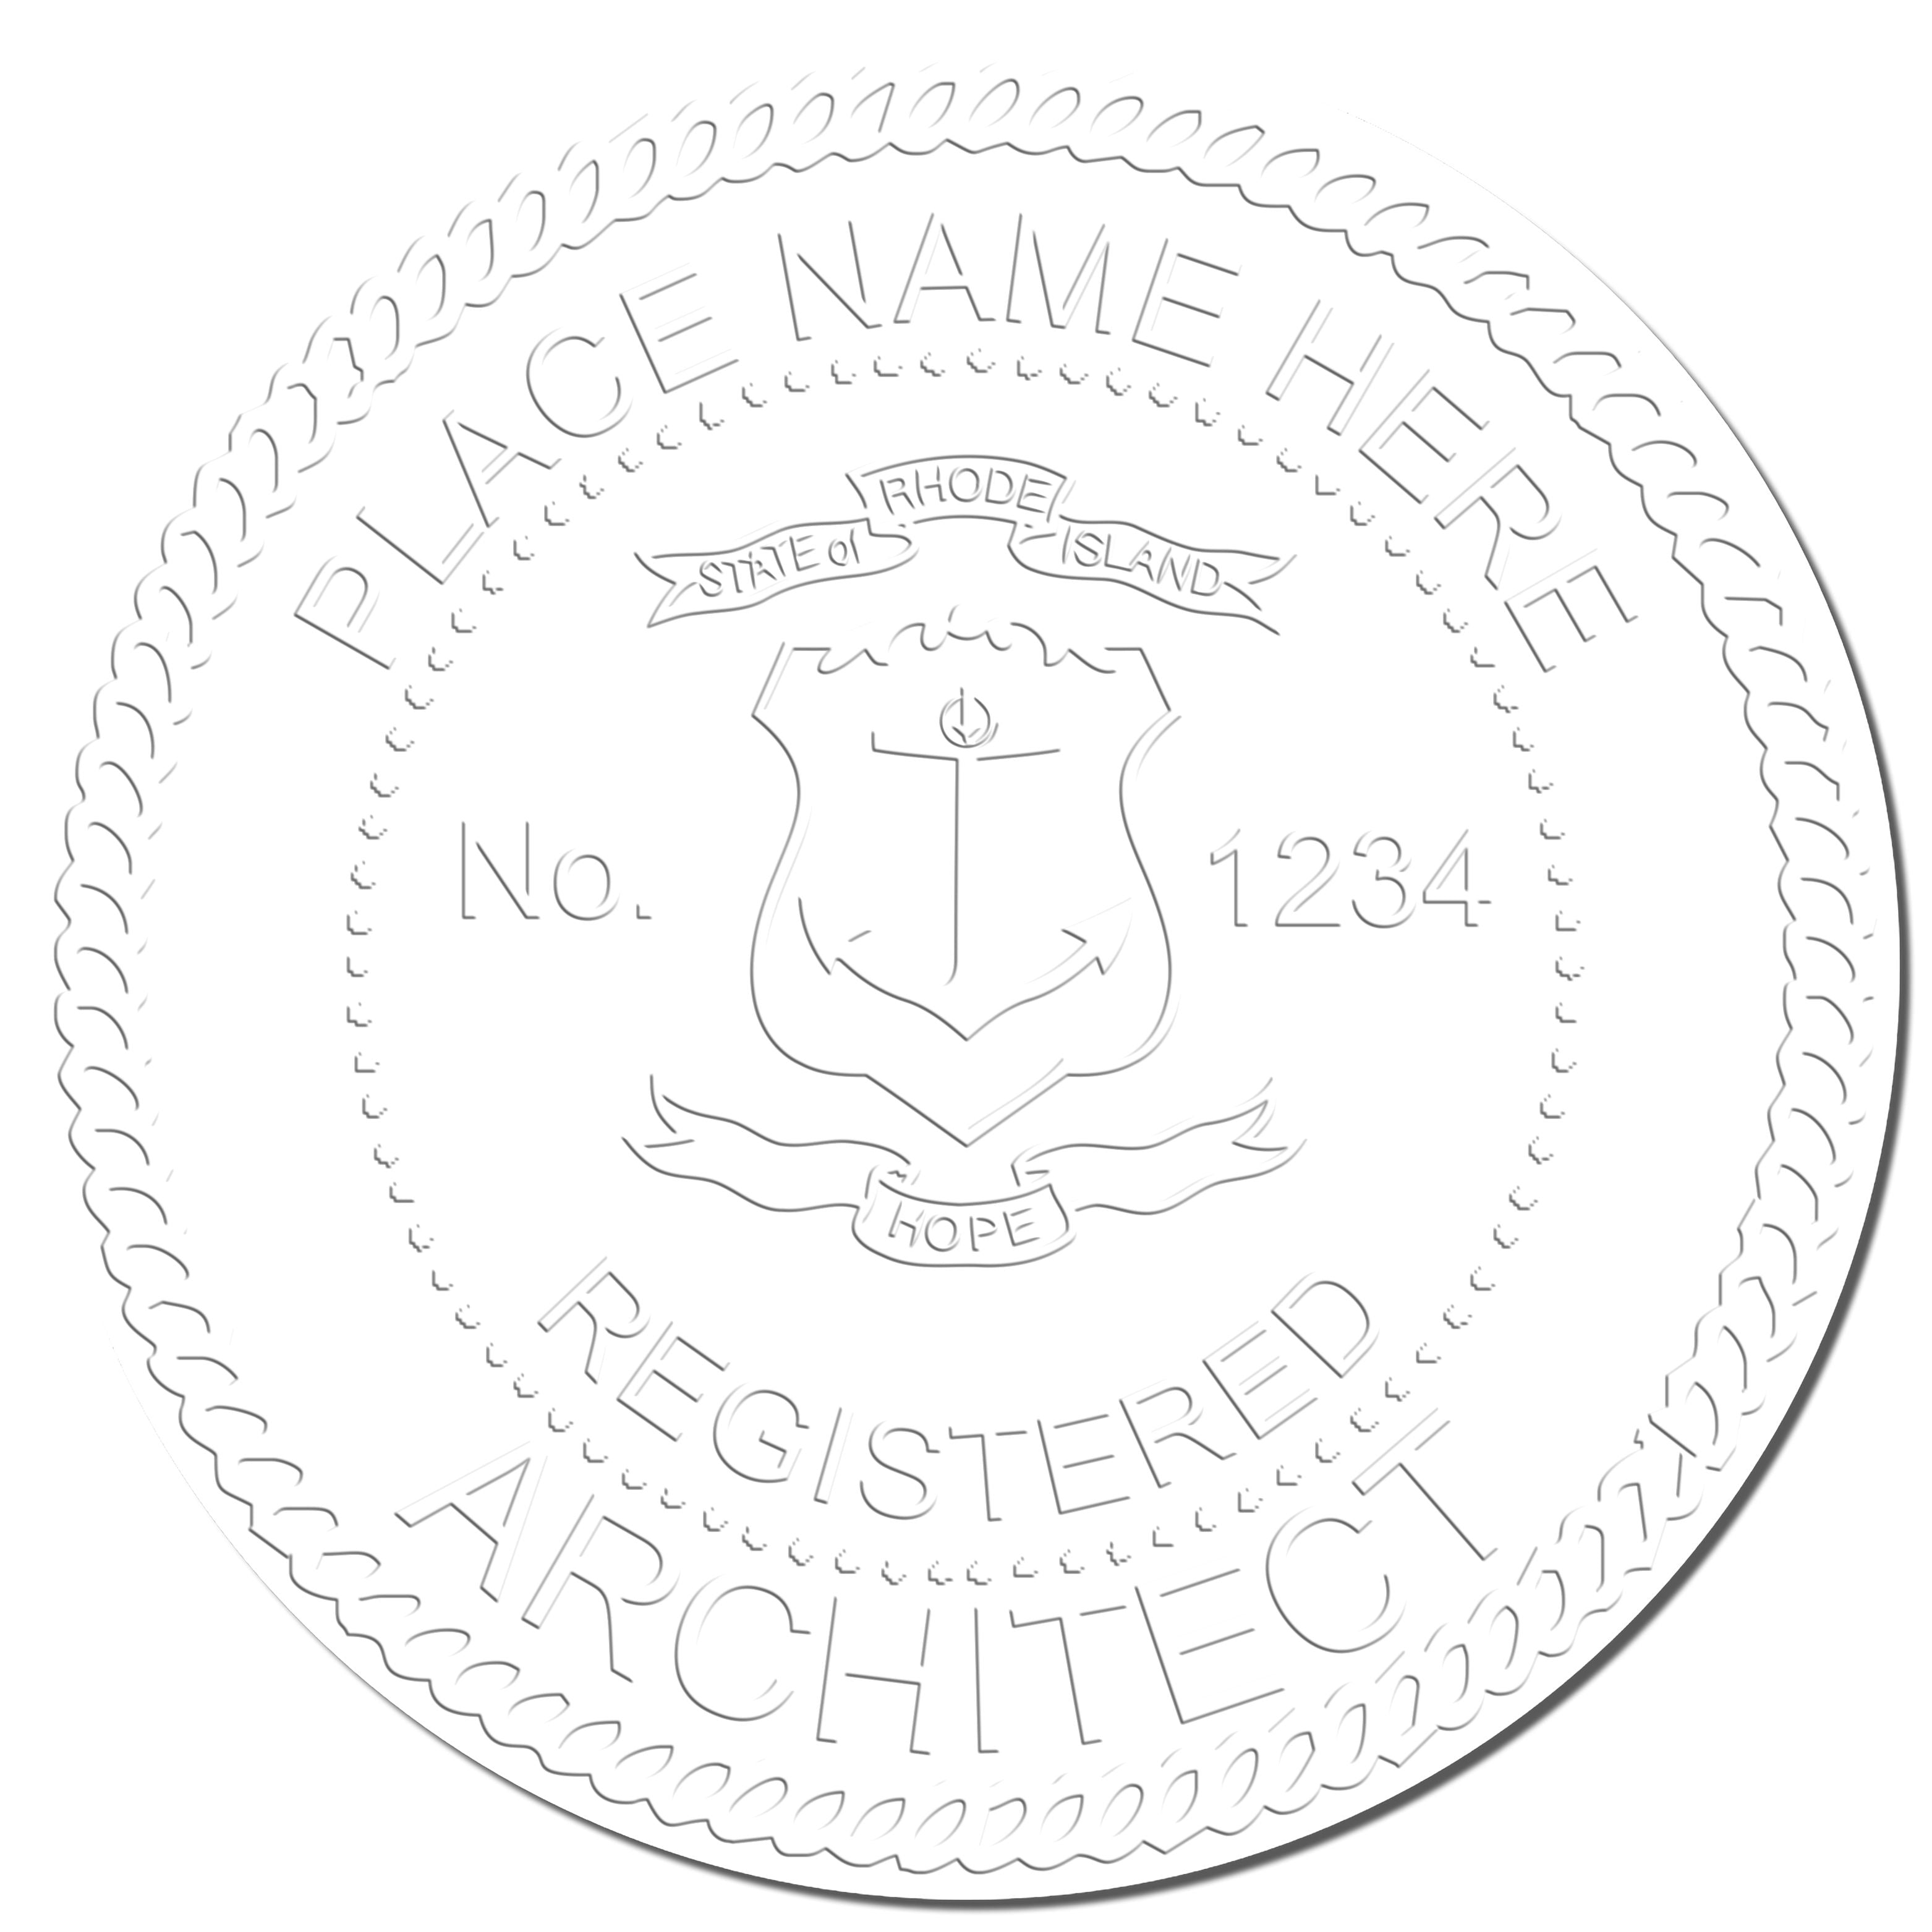 A photograph of the Extended Long Reach Rhode Island Architect Seal Embosser stamp impression reveals a vivid, professional image of the on paper.